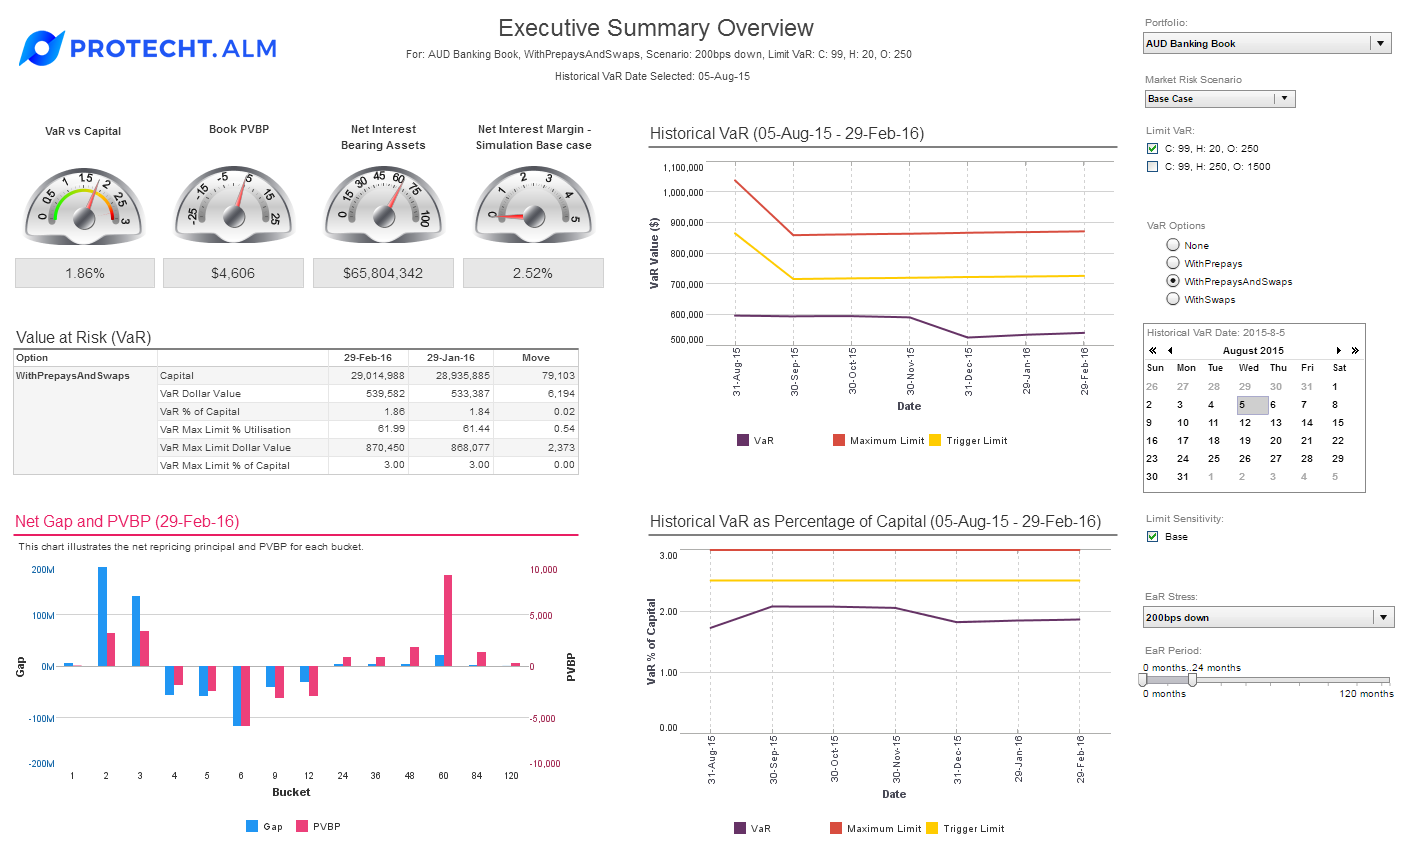 Features-ALM-dashboard-exec-summary-overview